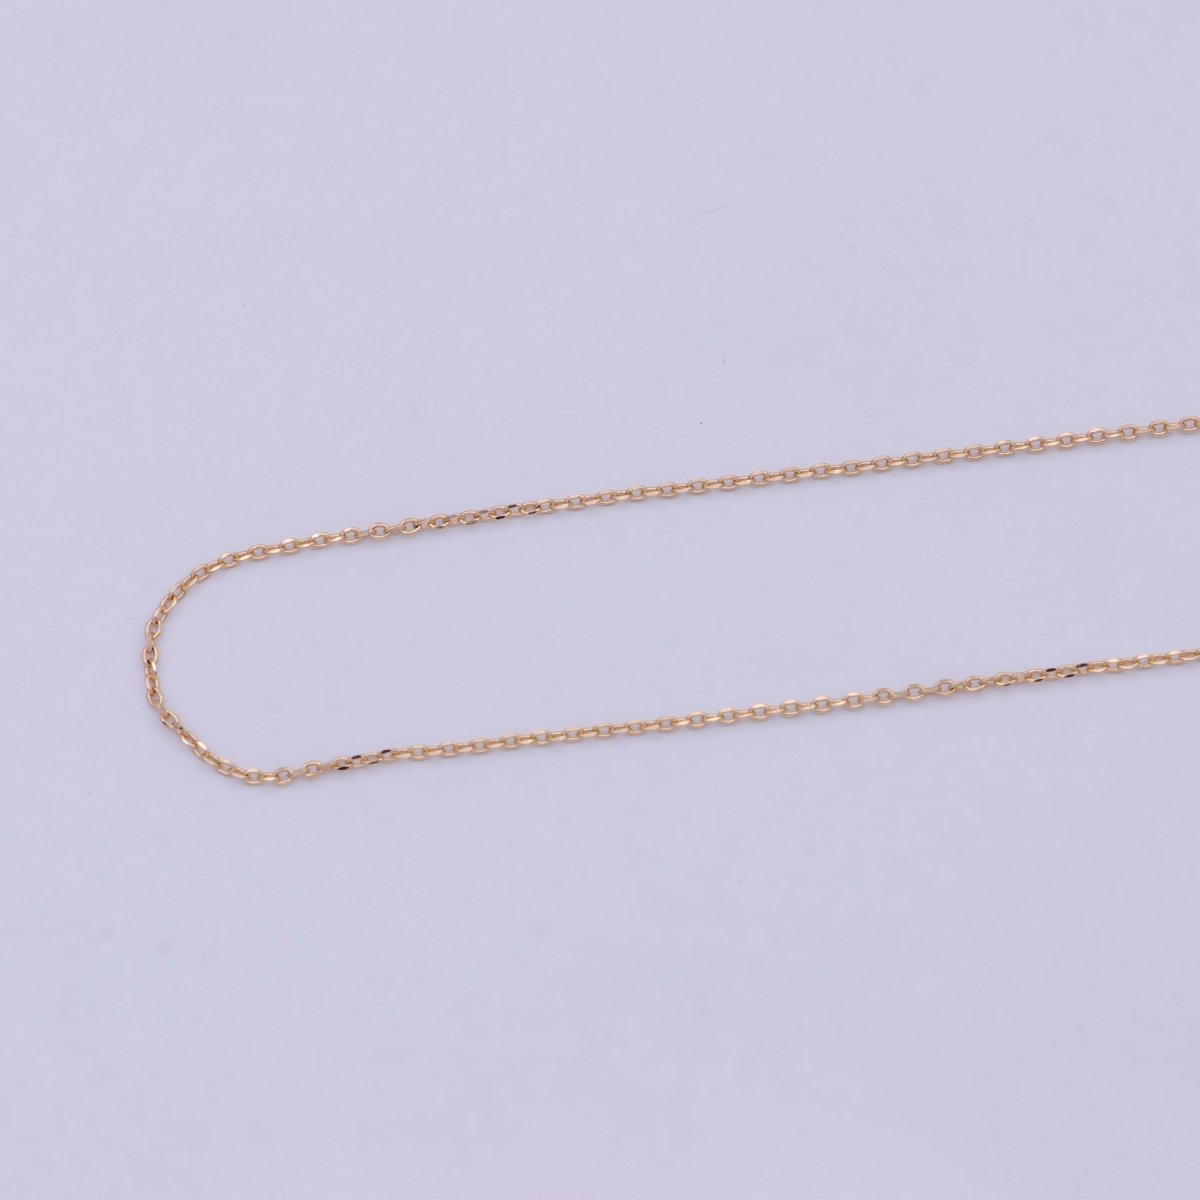 Fine 18K Gold Filled Cable Chain Necklace Link chain necklace 17.5 inch Ready to Wear | WA-758 Clearance Pricing - DLUXCA